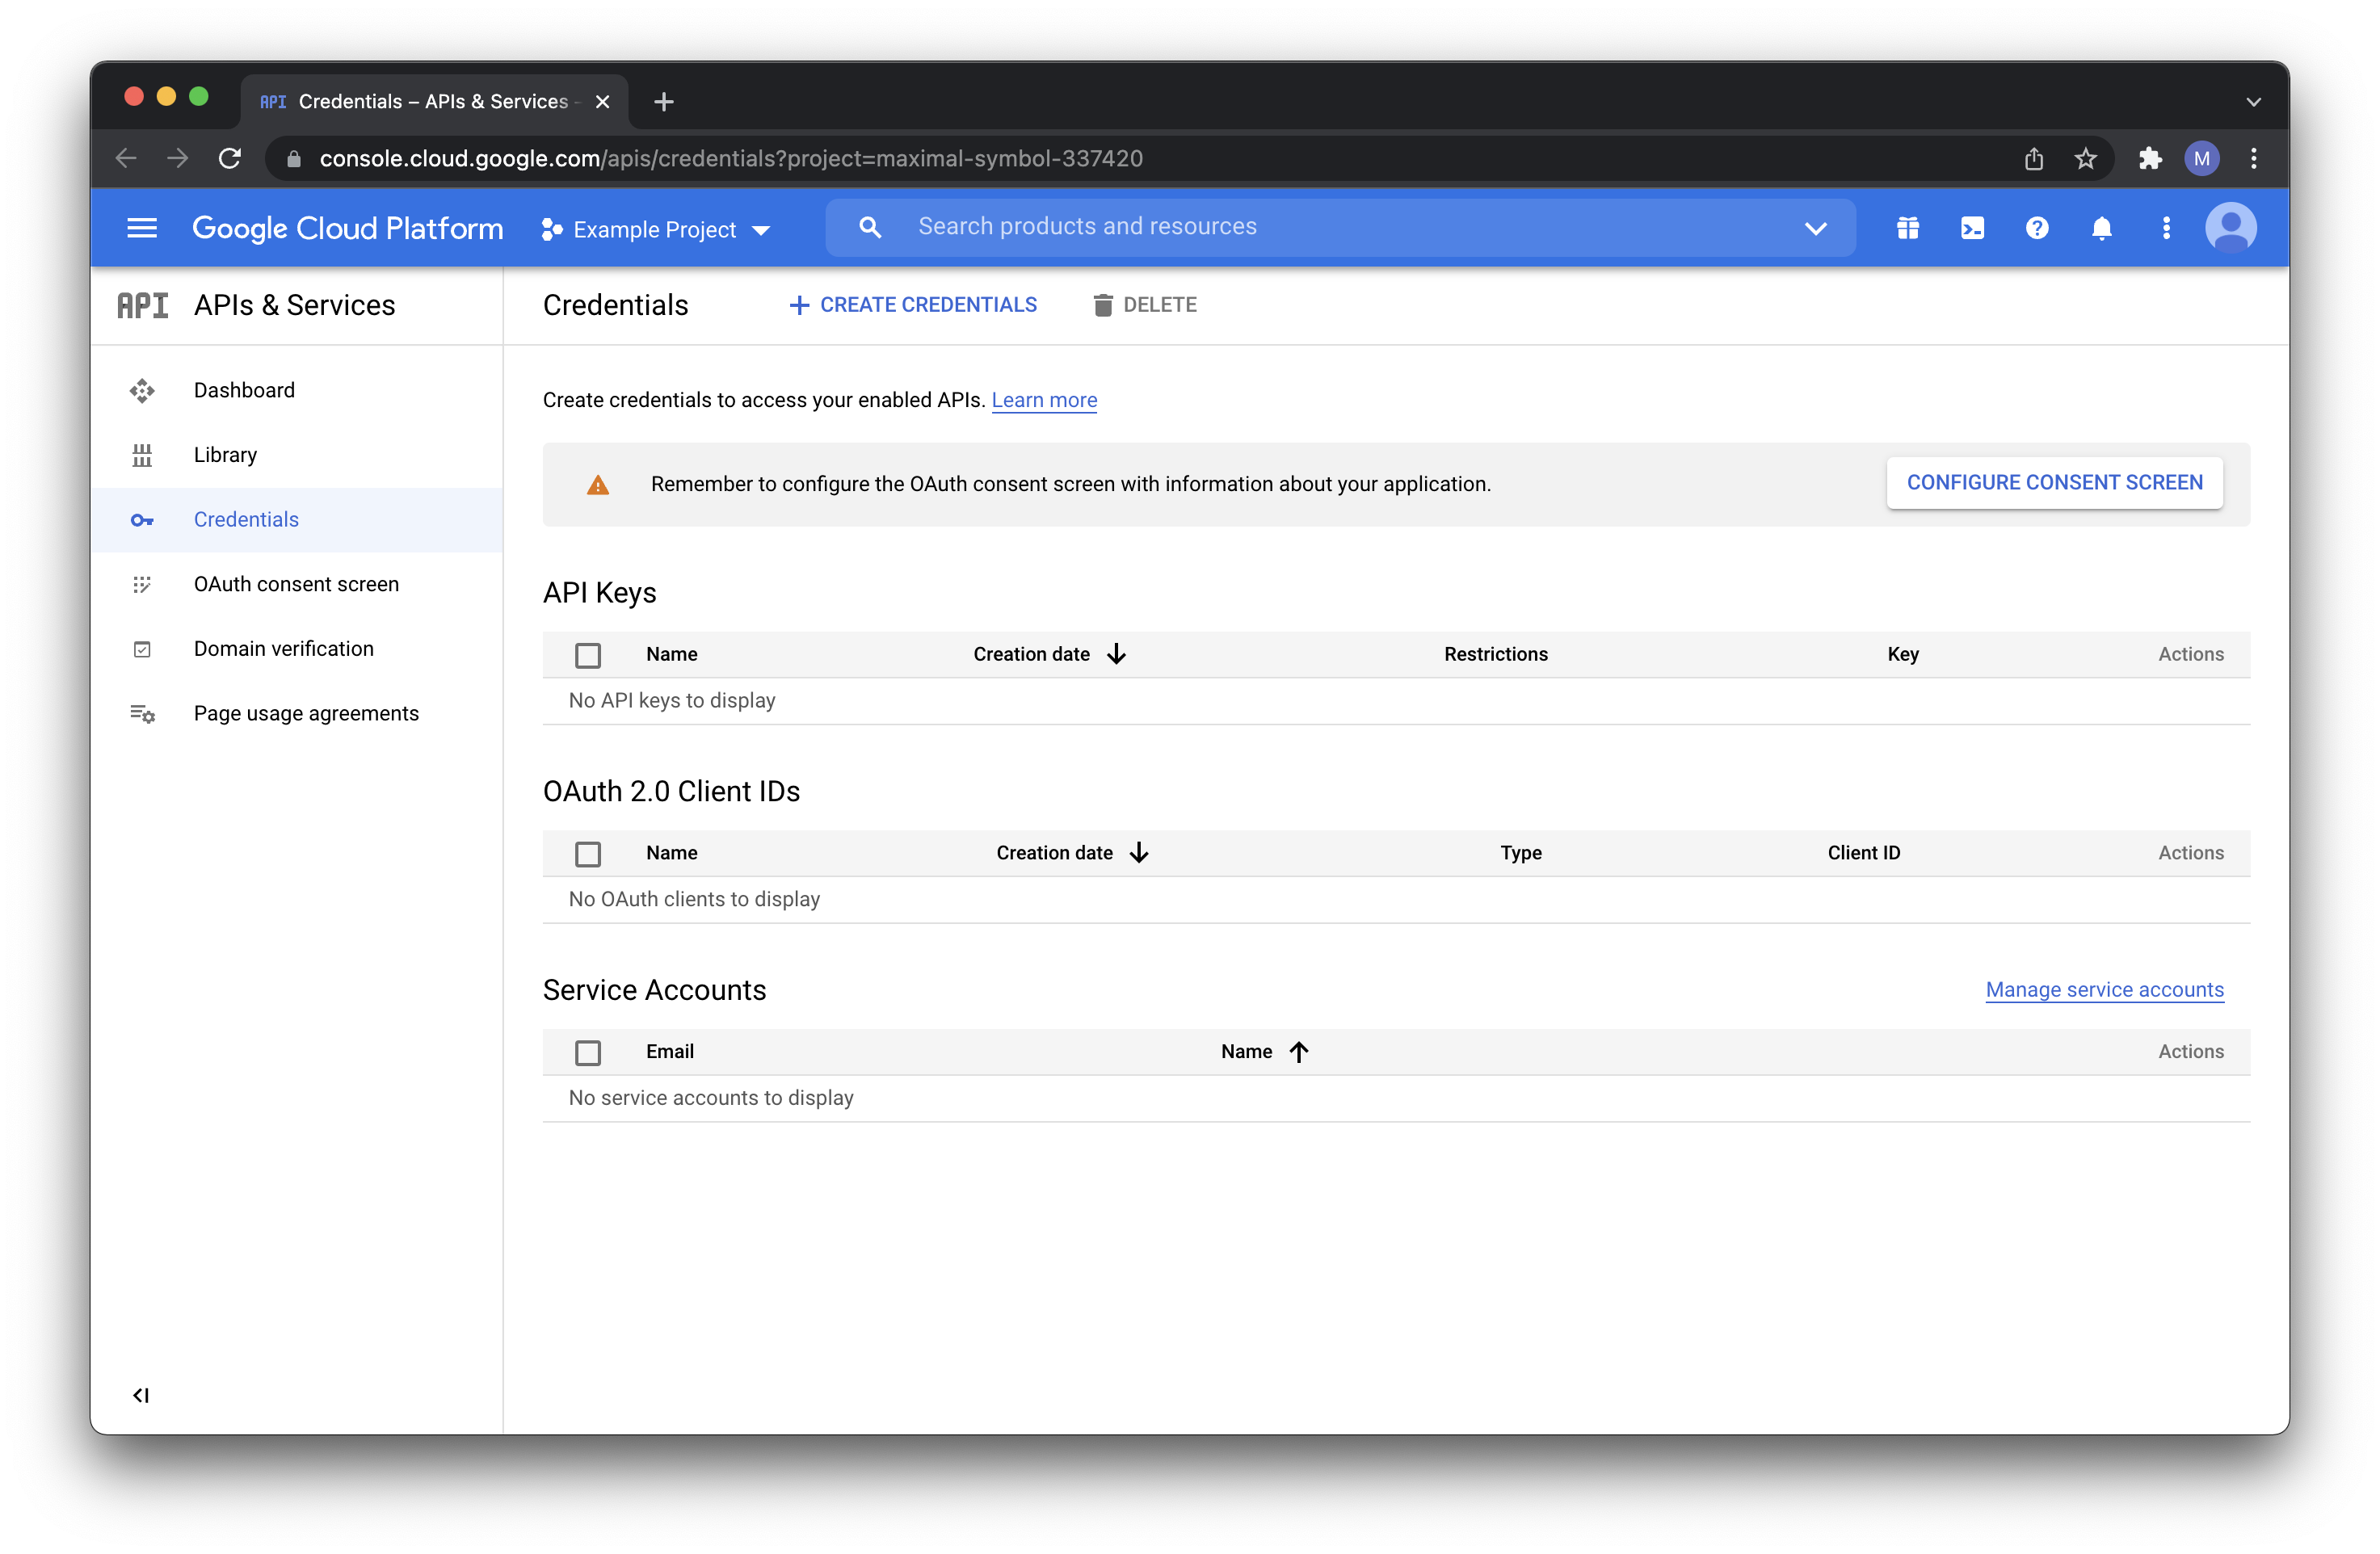 We have selected an **Example Project** in Google Cloud Platform API